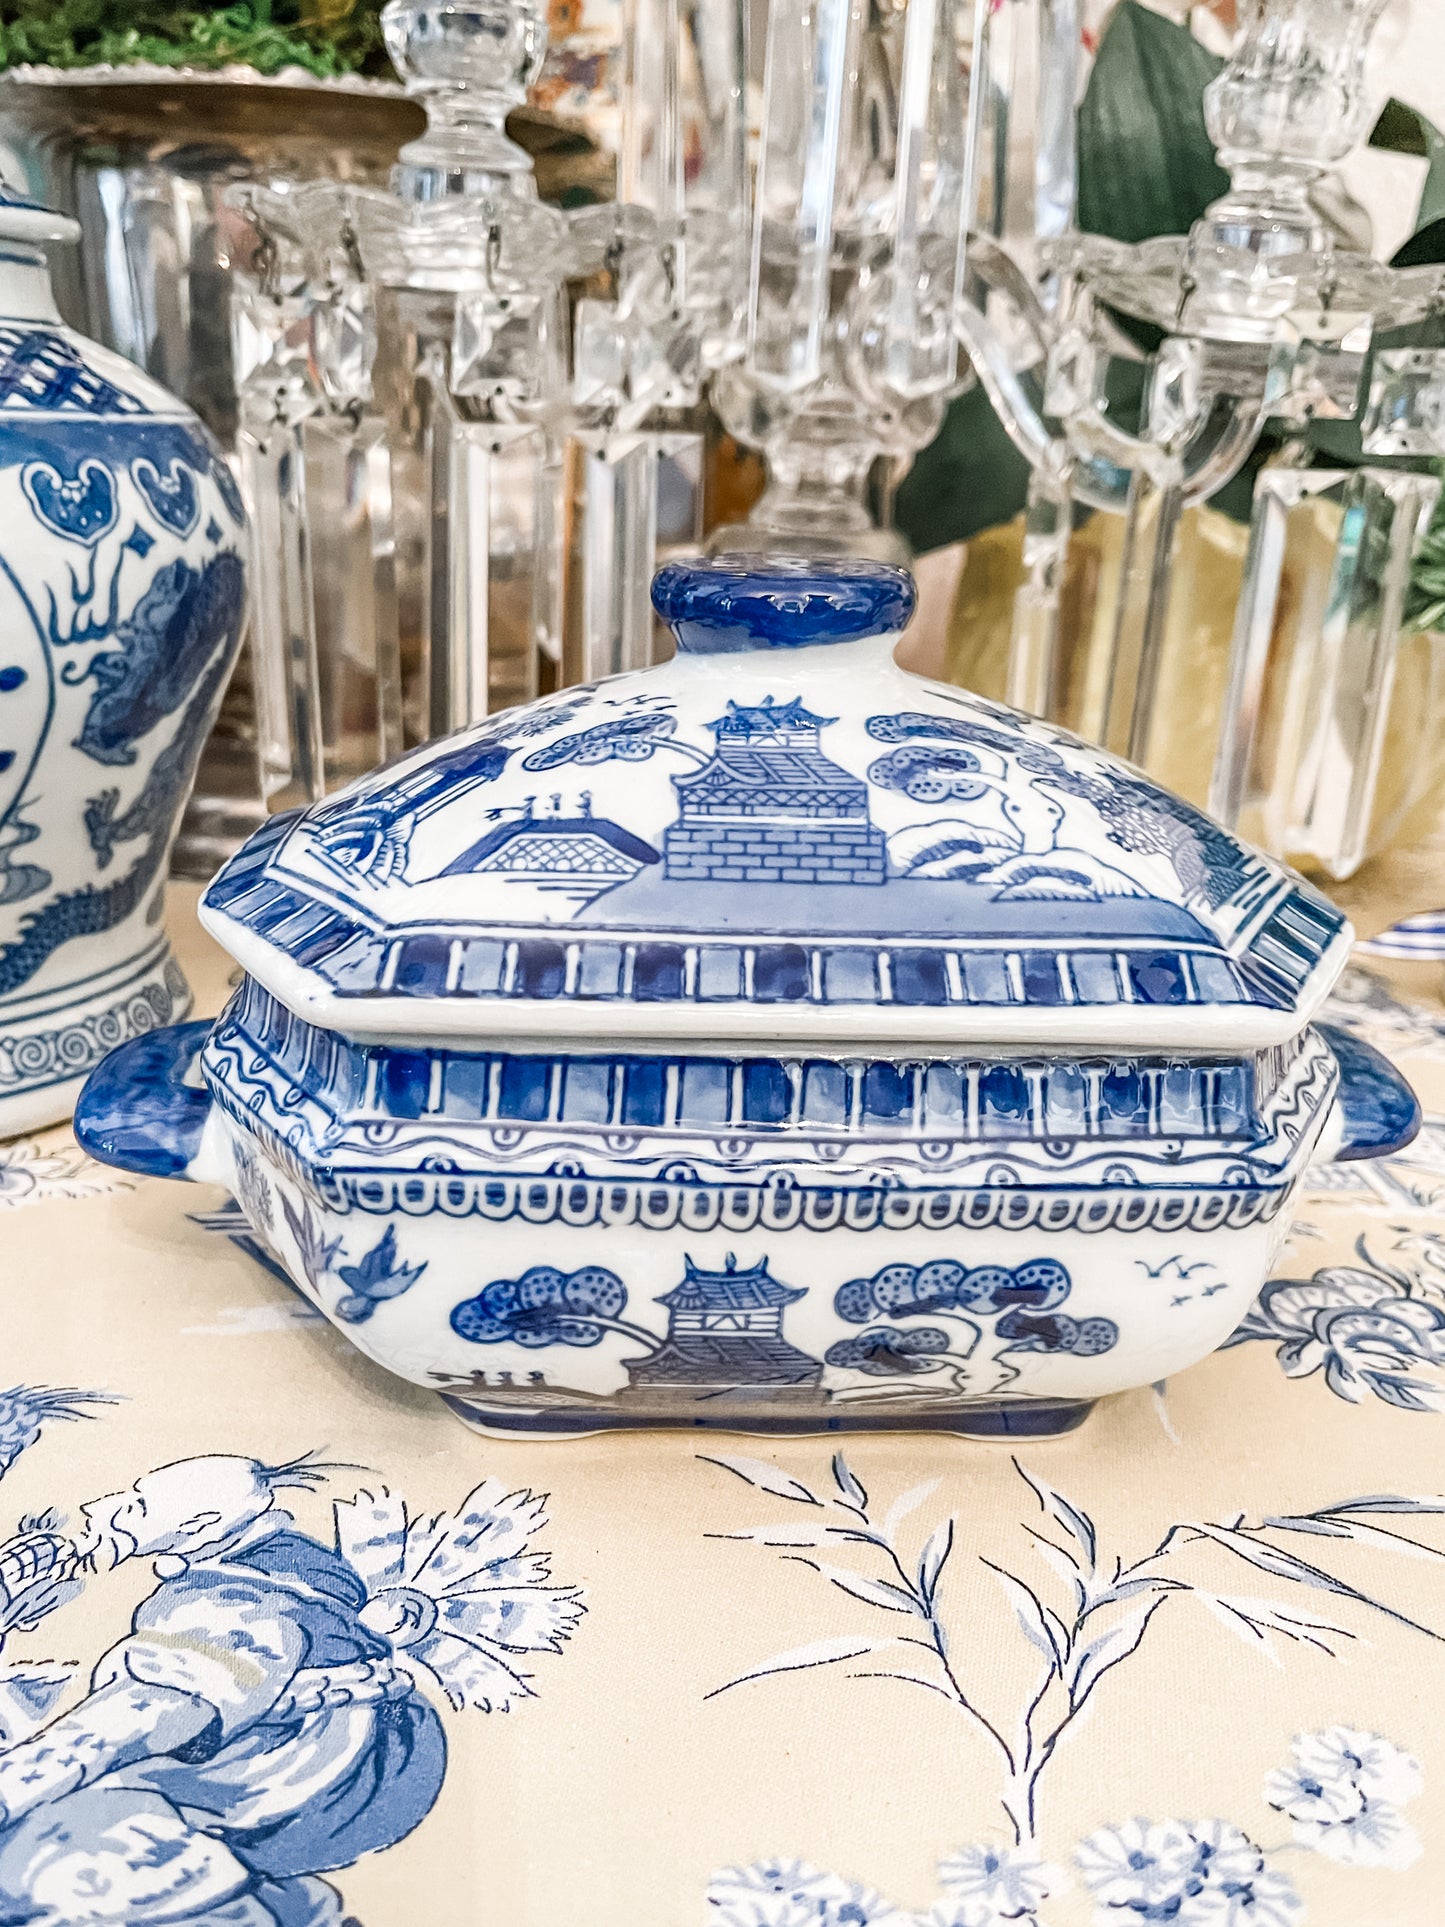 Blue Willow Style Lidded Dish, Blue and White Chinoiserie Chic